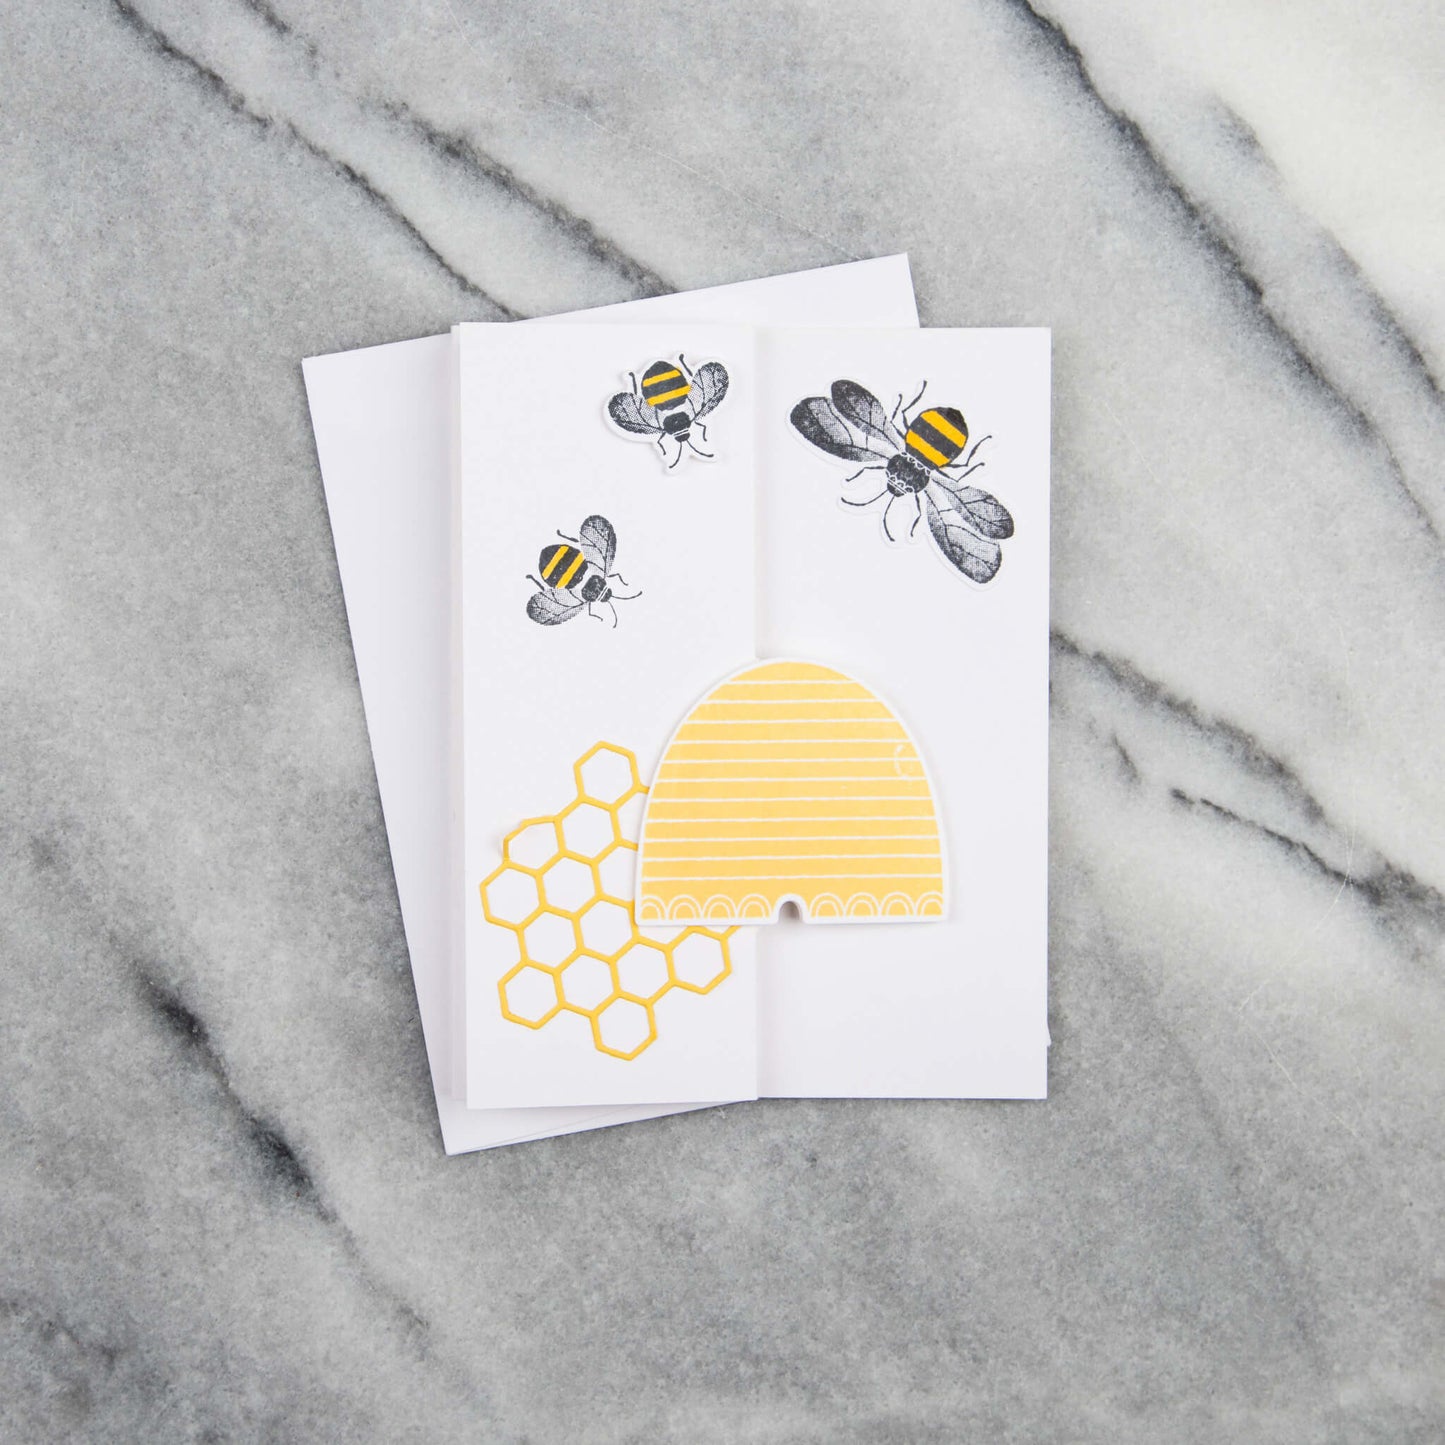 Pop-up greeting card with a hive, honeycomb pattern, and honeybees